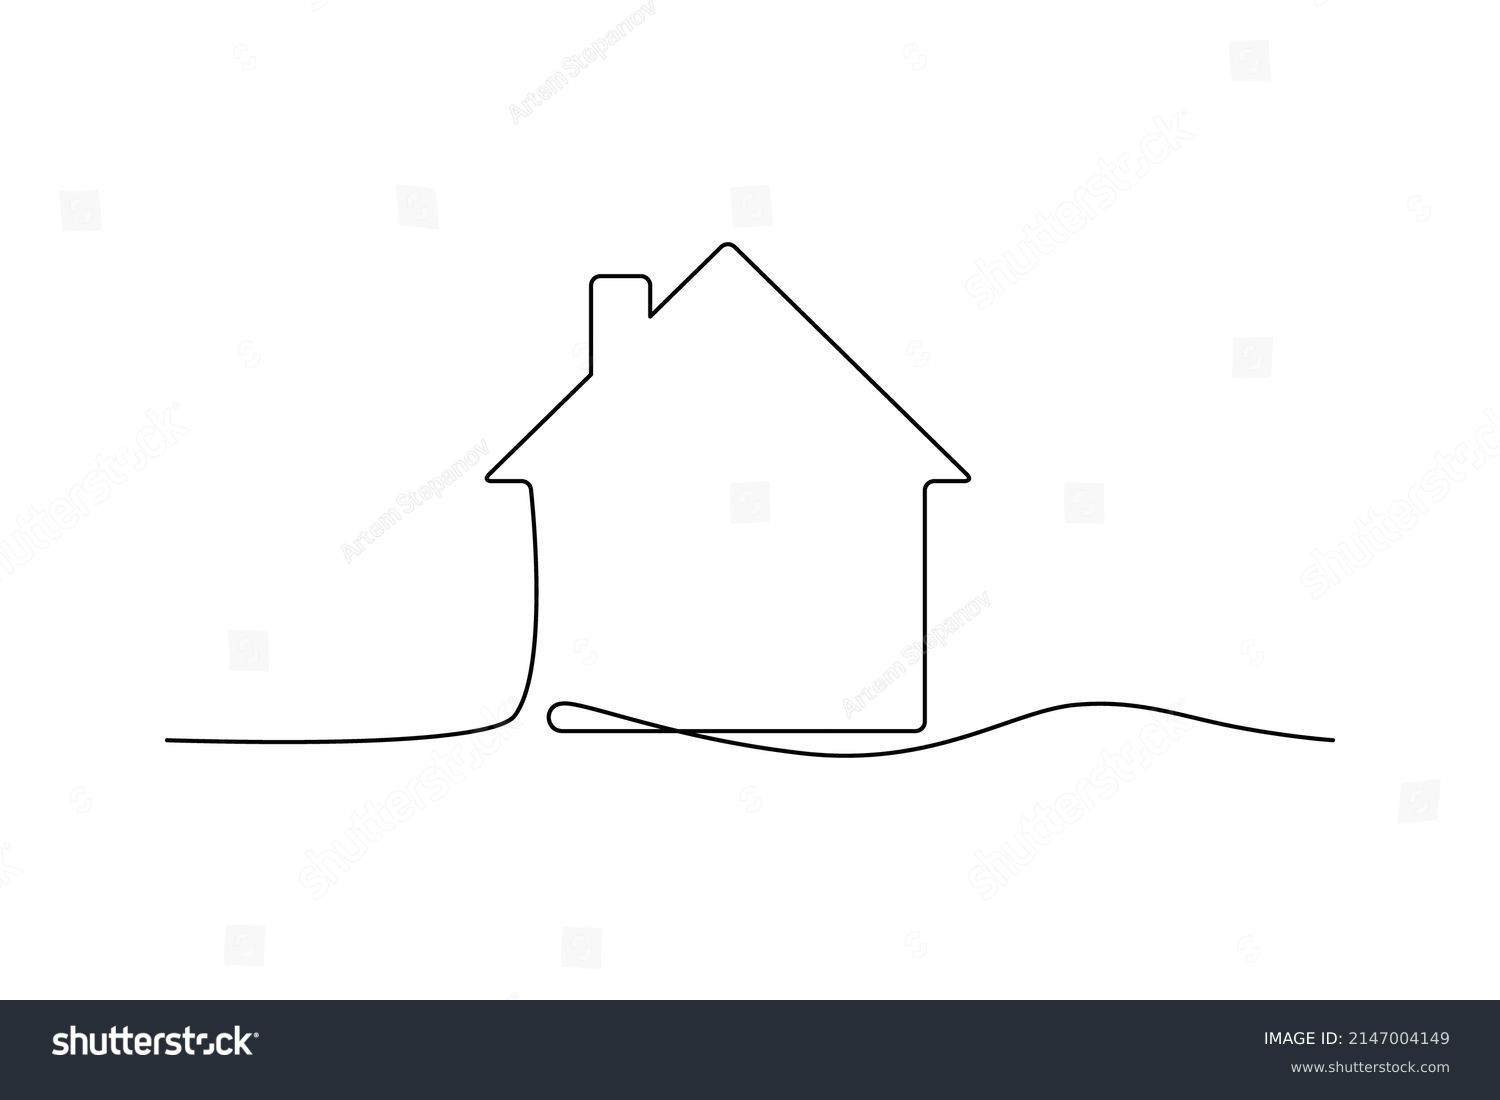 SVG of Continuous thin line home vector illustration, minimalist house icon. One line art cottage building svg